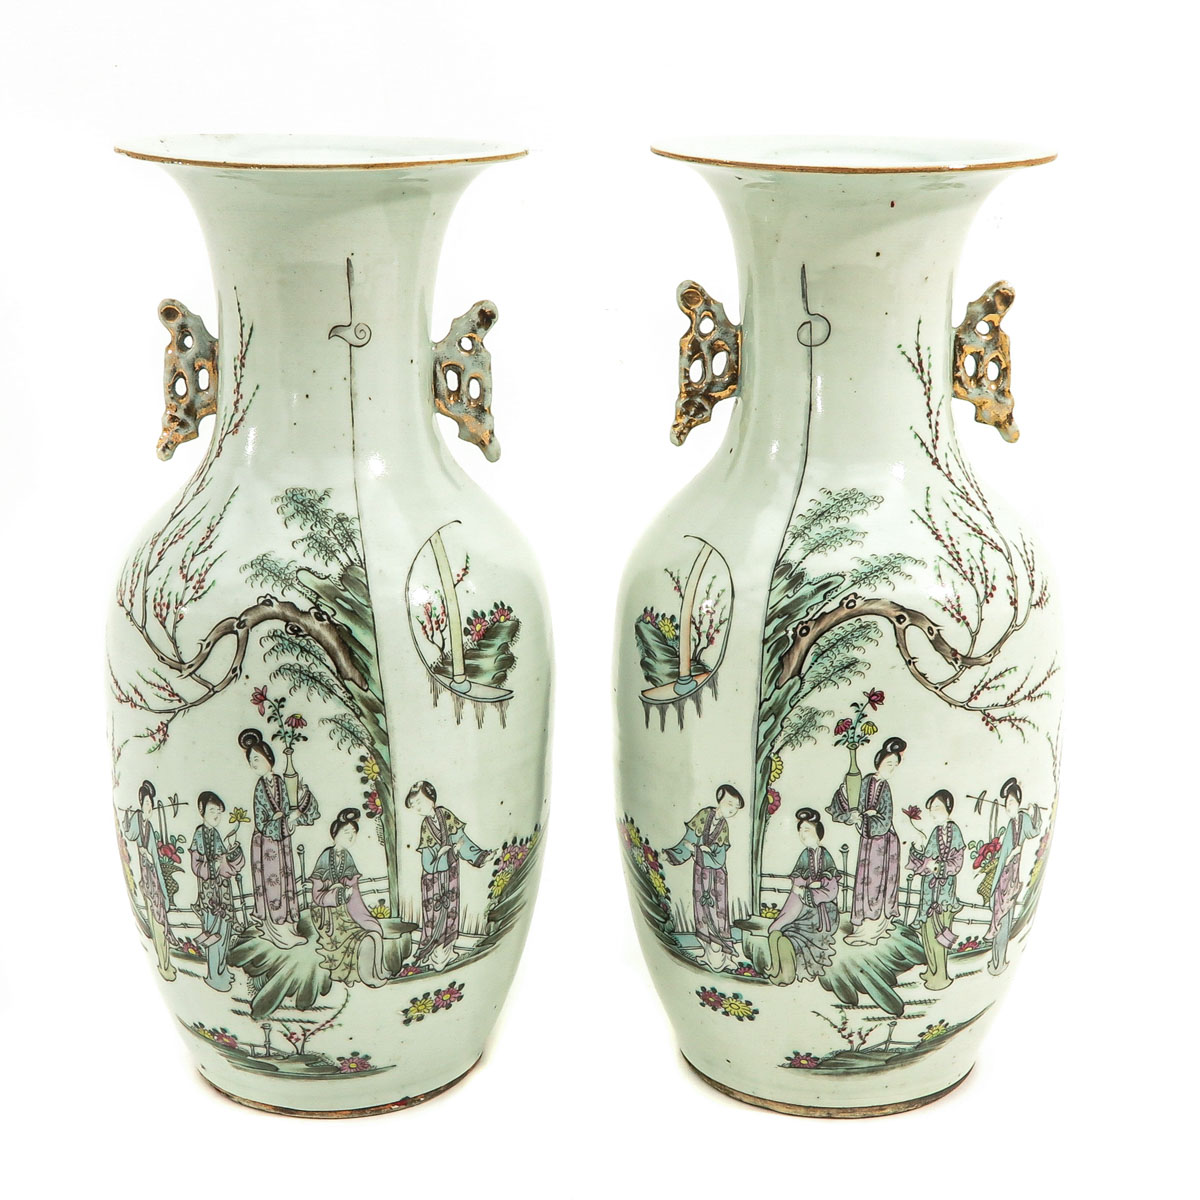 A Pair of Qianjiang Cai Decor Vases